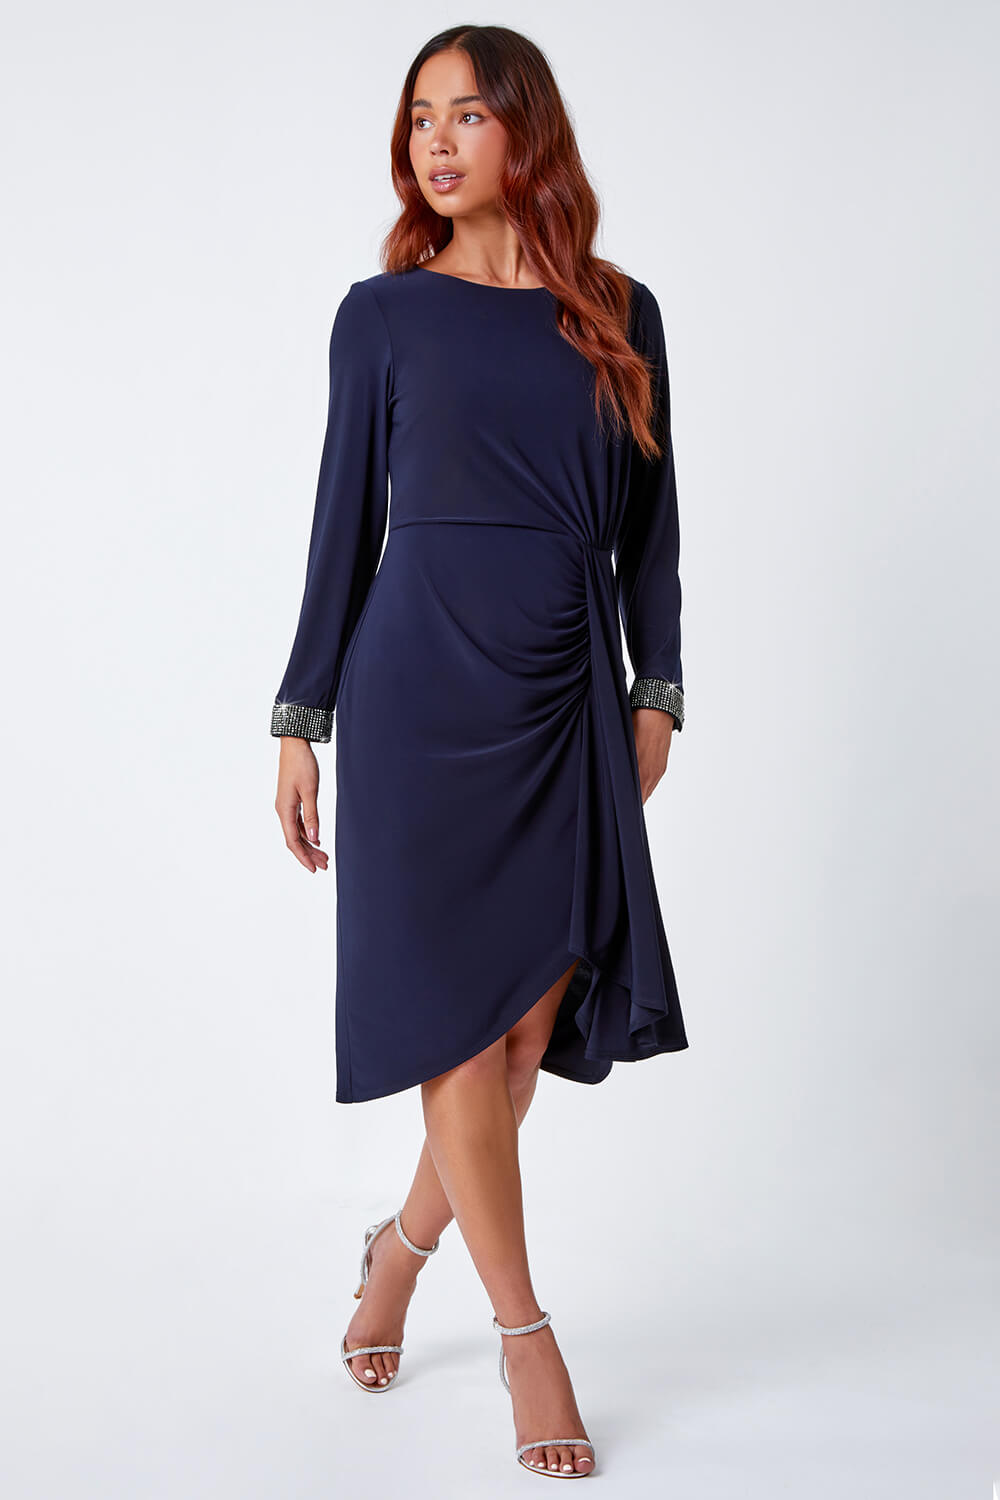 Navy  Petite Ruched Side Drape Stretch Dress, Image 1 of 5